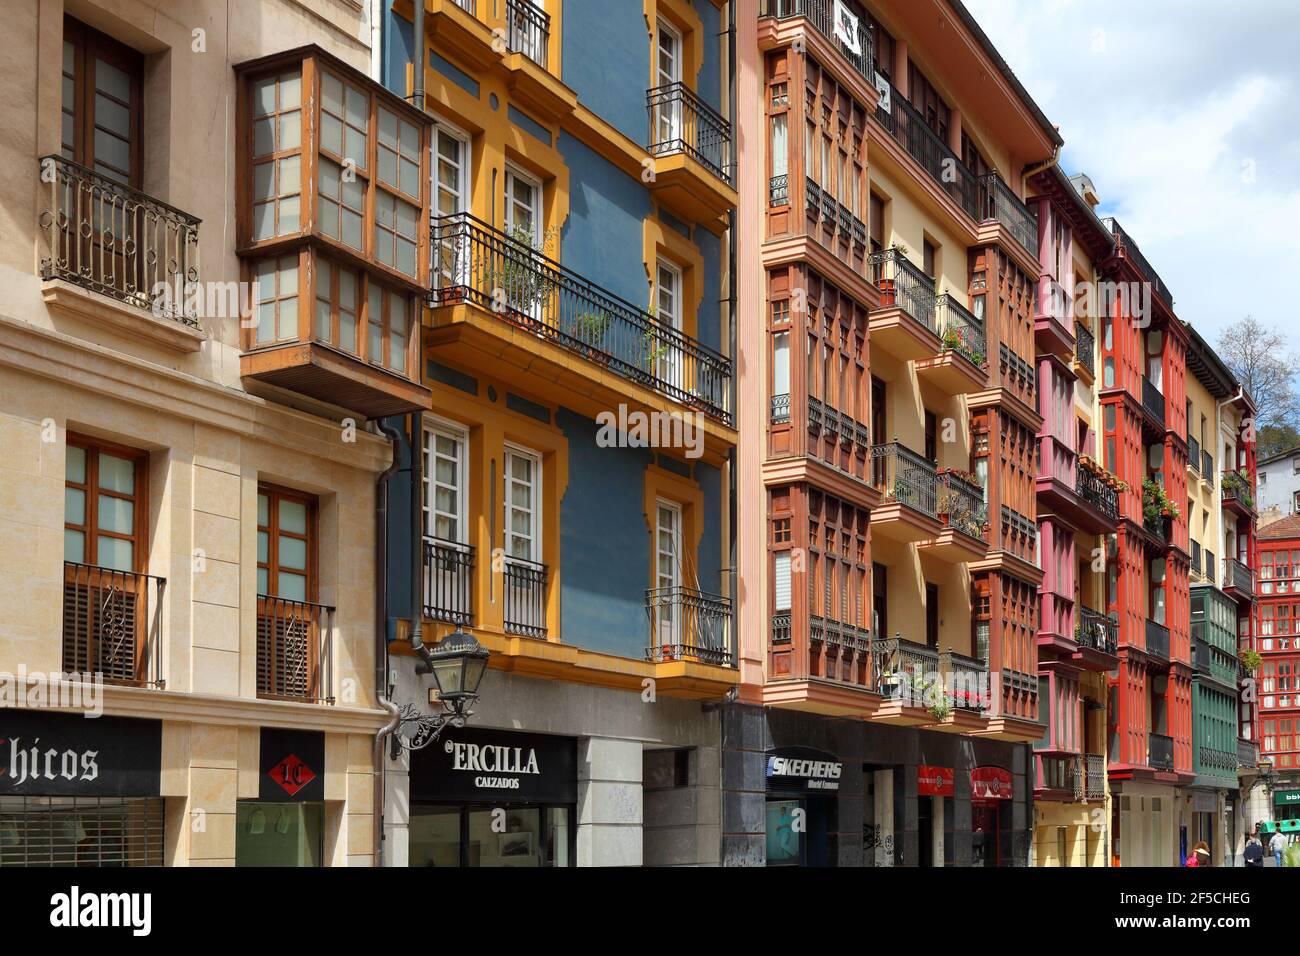 geography / travel, Spain, Basque region, Bilbao, in the old town, Bilbao,  Basque region, Additional-Rights-Clearance-Info-Not-Available Stock Photo -  Alamy